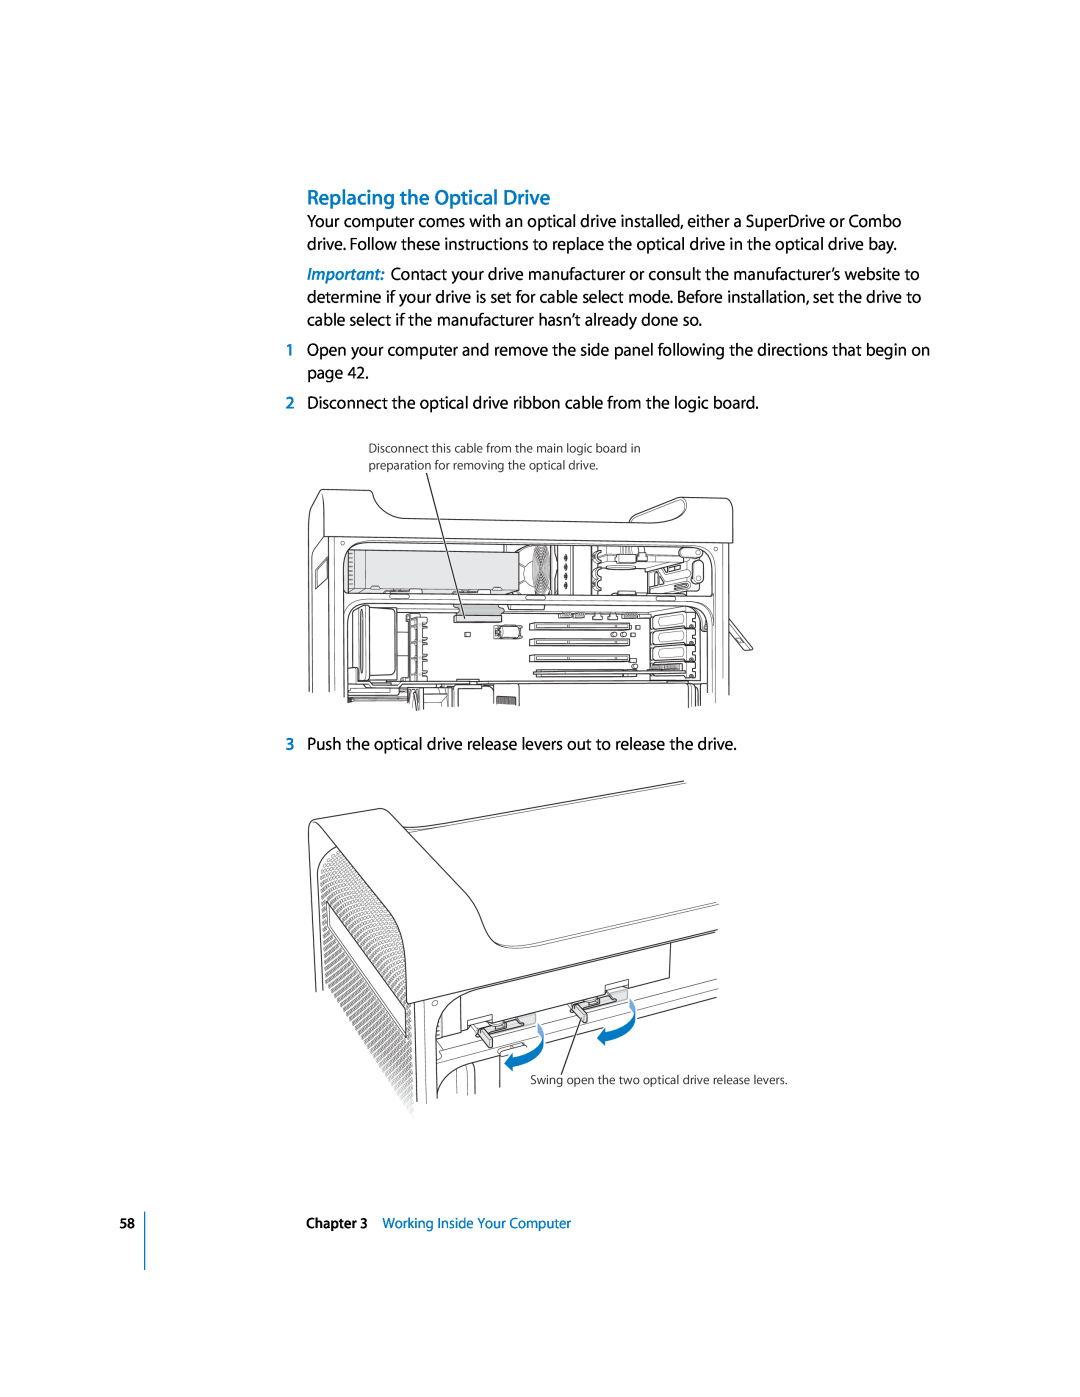 Apple G5 manual Replacing the Optical Drive, Swing open the two optical drive release levers 